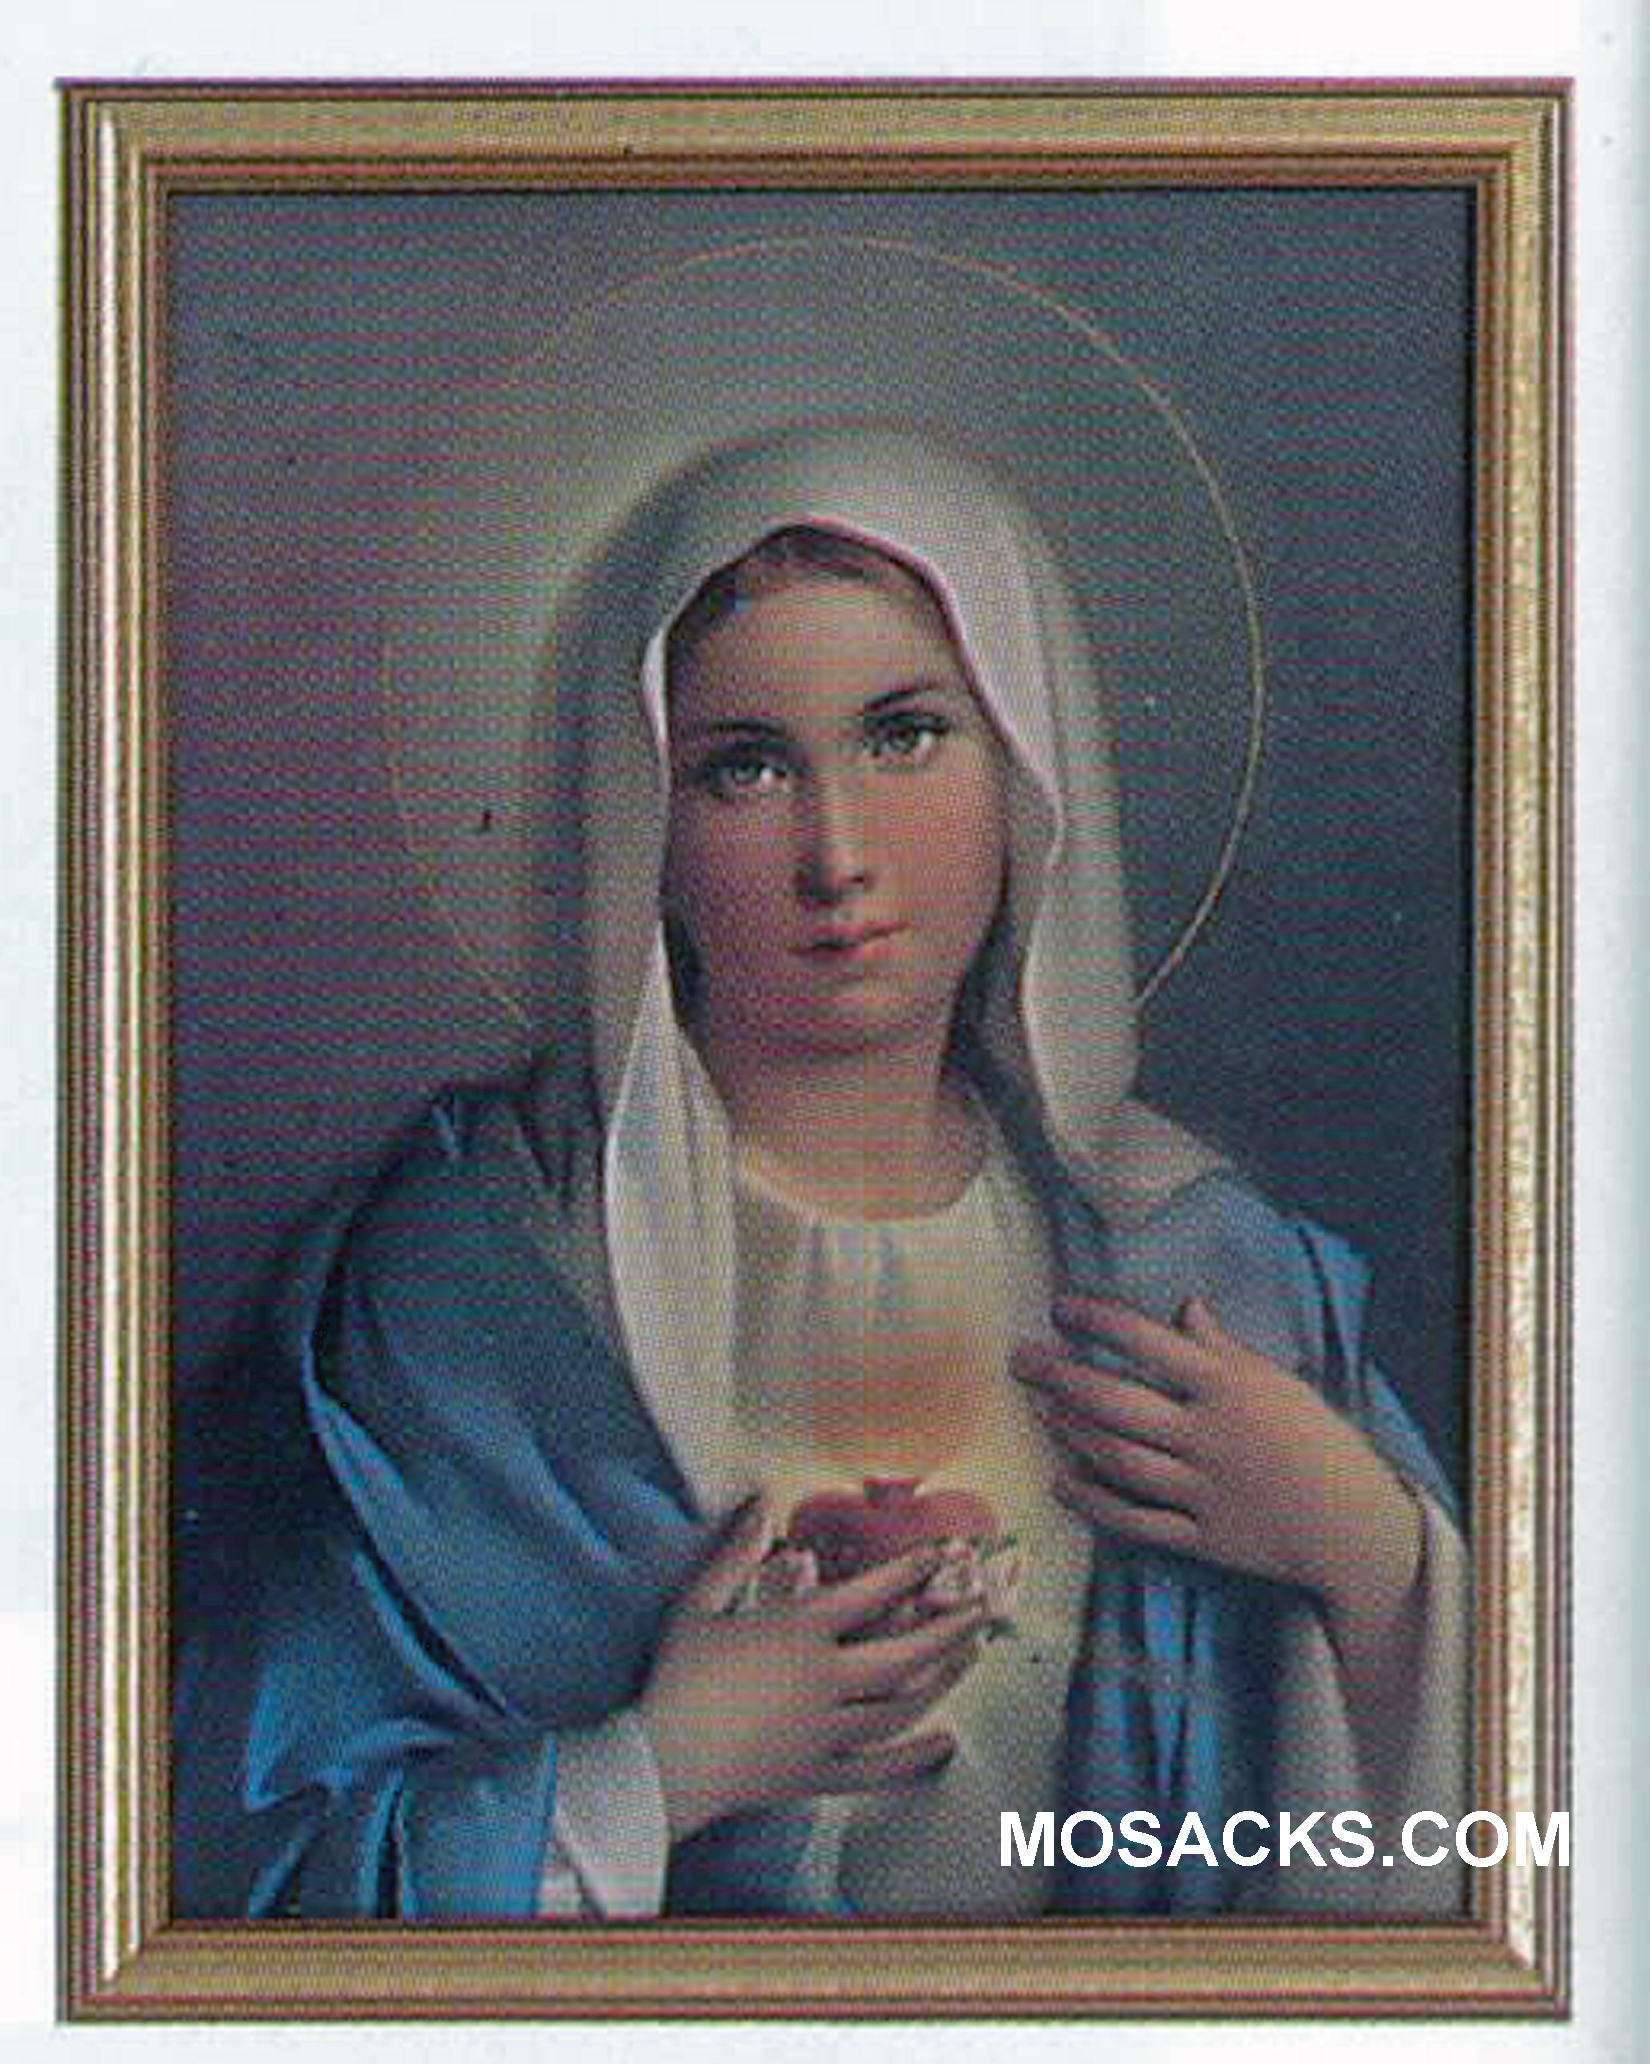 Immaculate Heart of Mary 11" x 14" print by Simeone in 1" gold leaf frame 556-1001  Overall size 13" x 16"